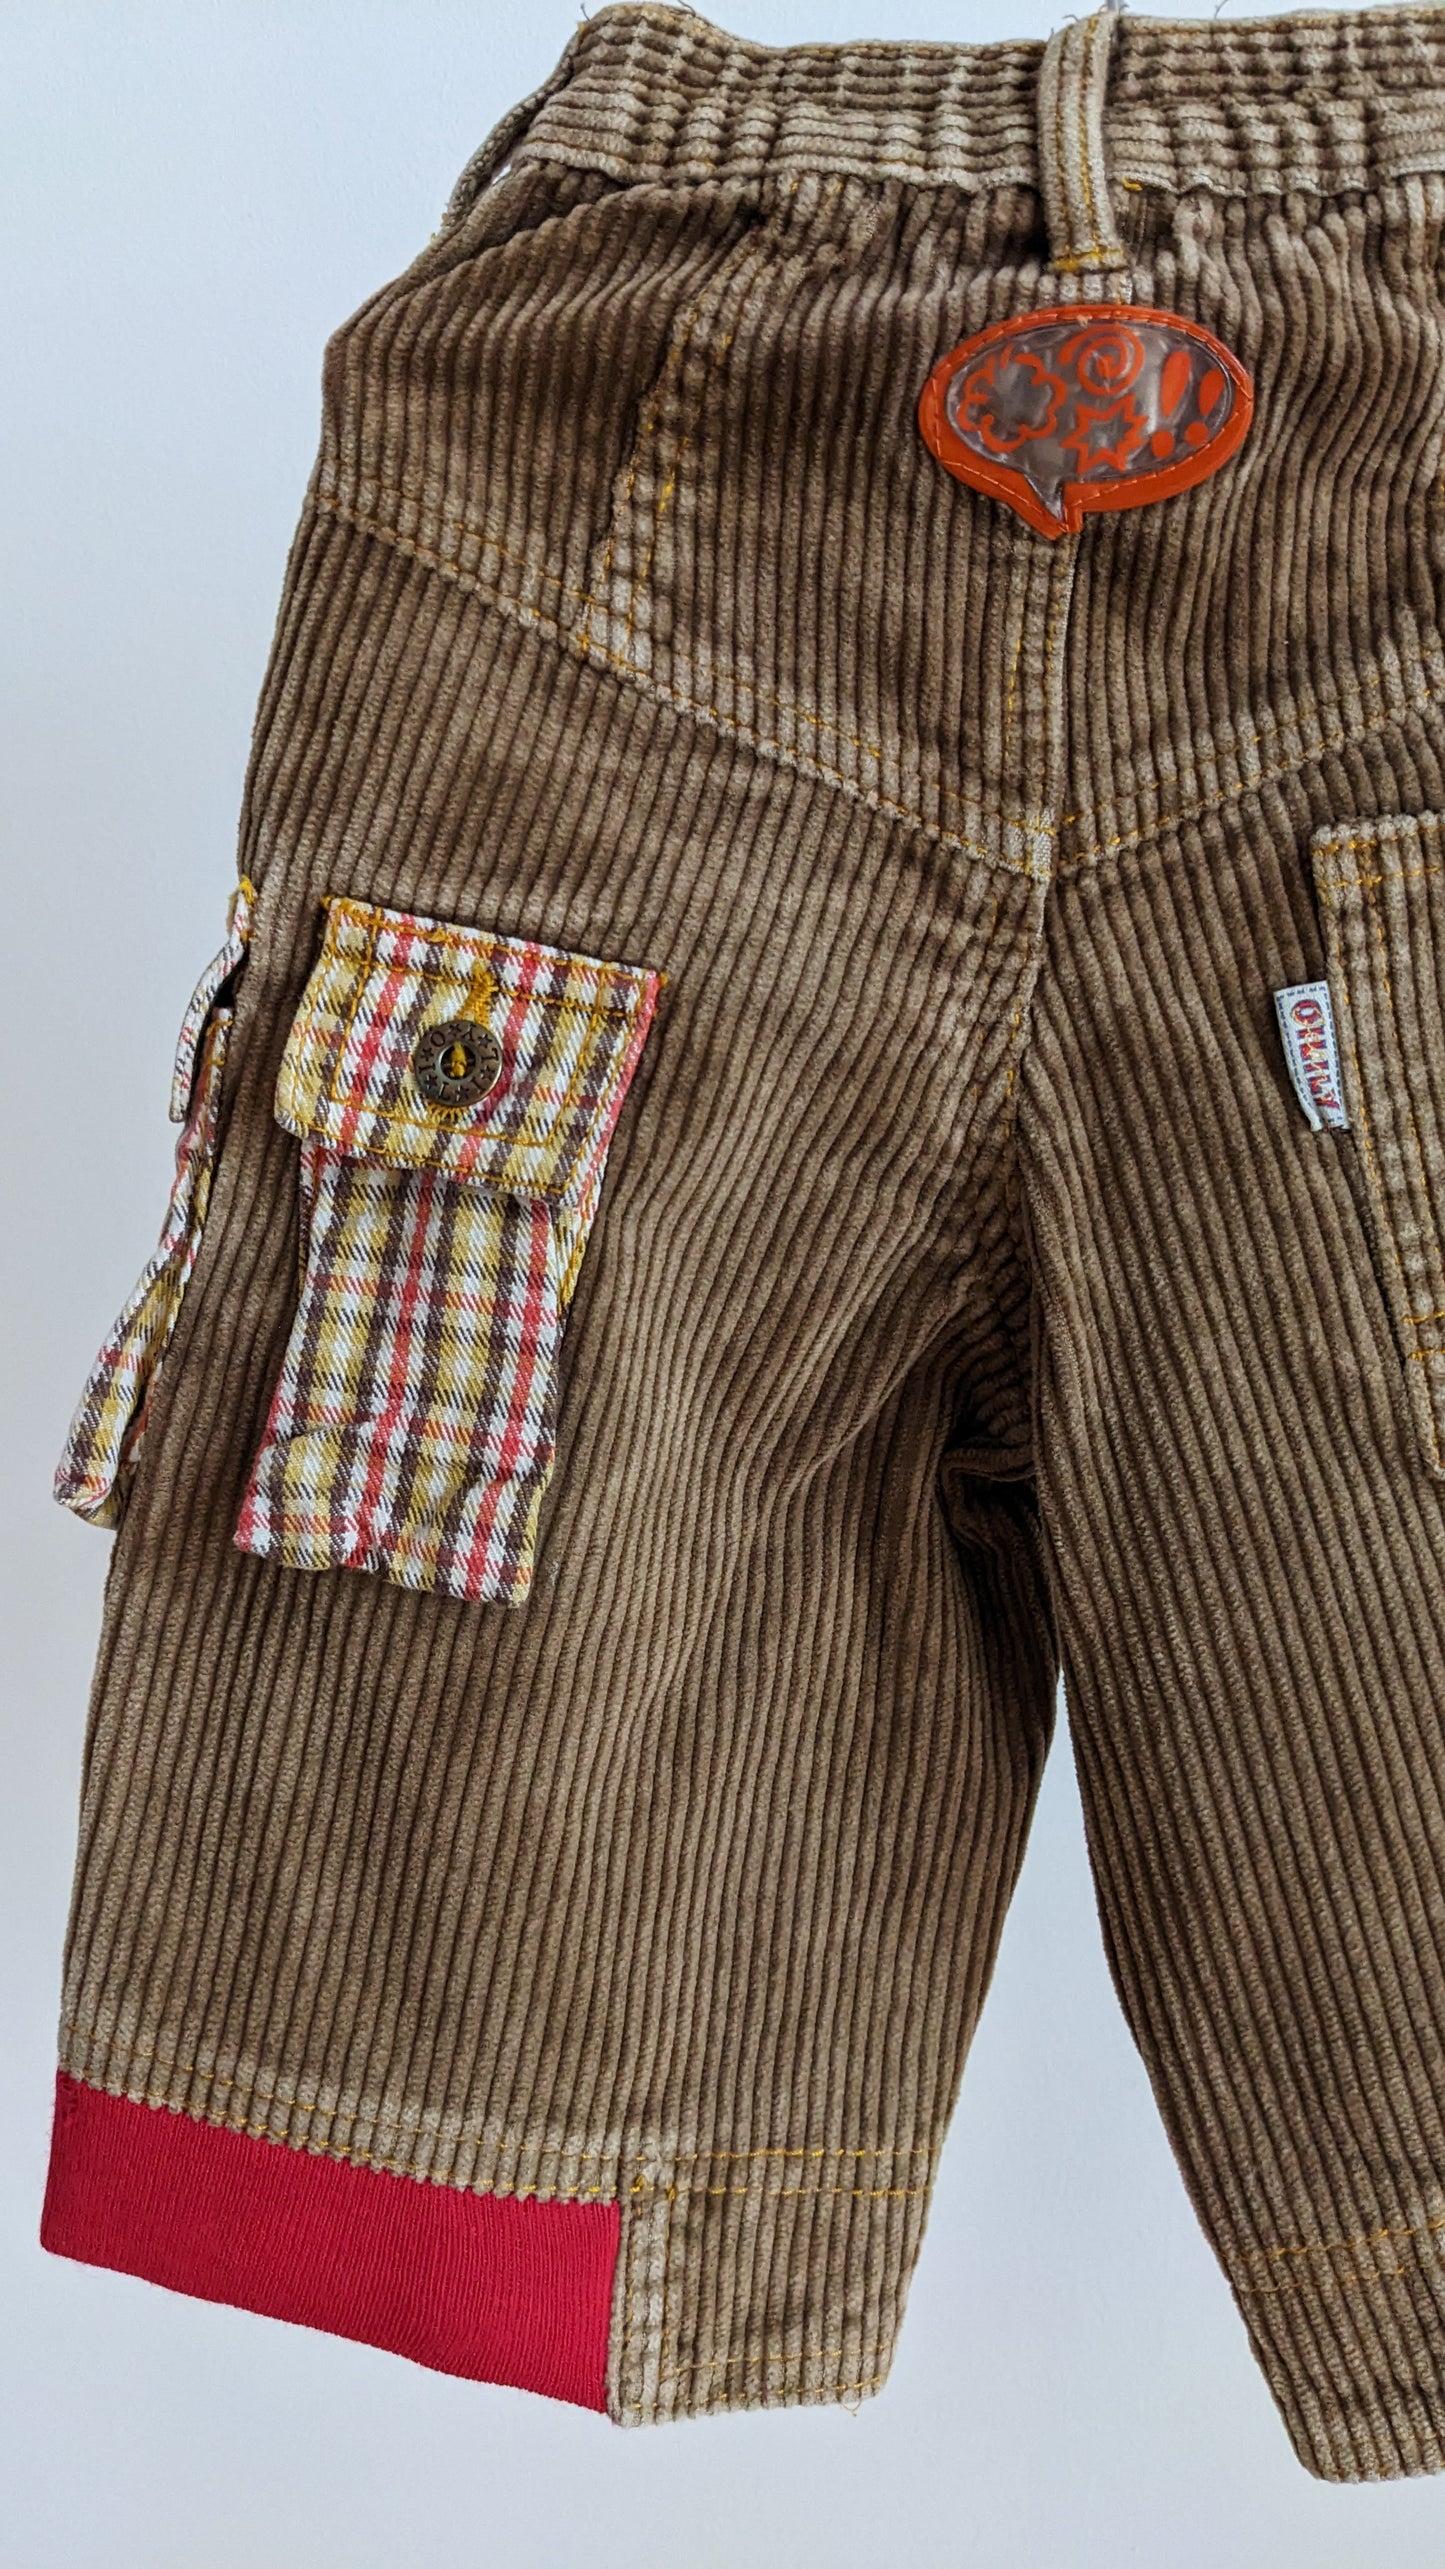 Oilily corduroy pants with pocket